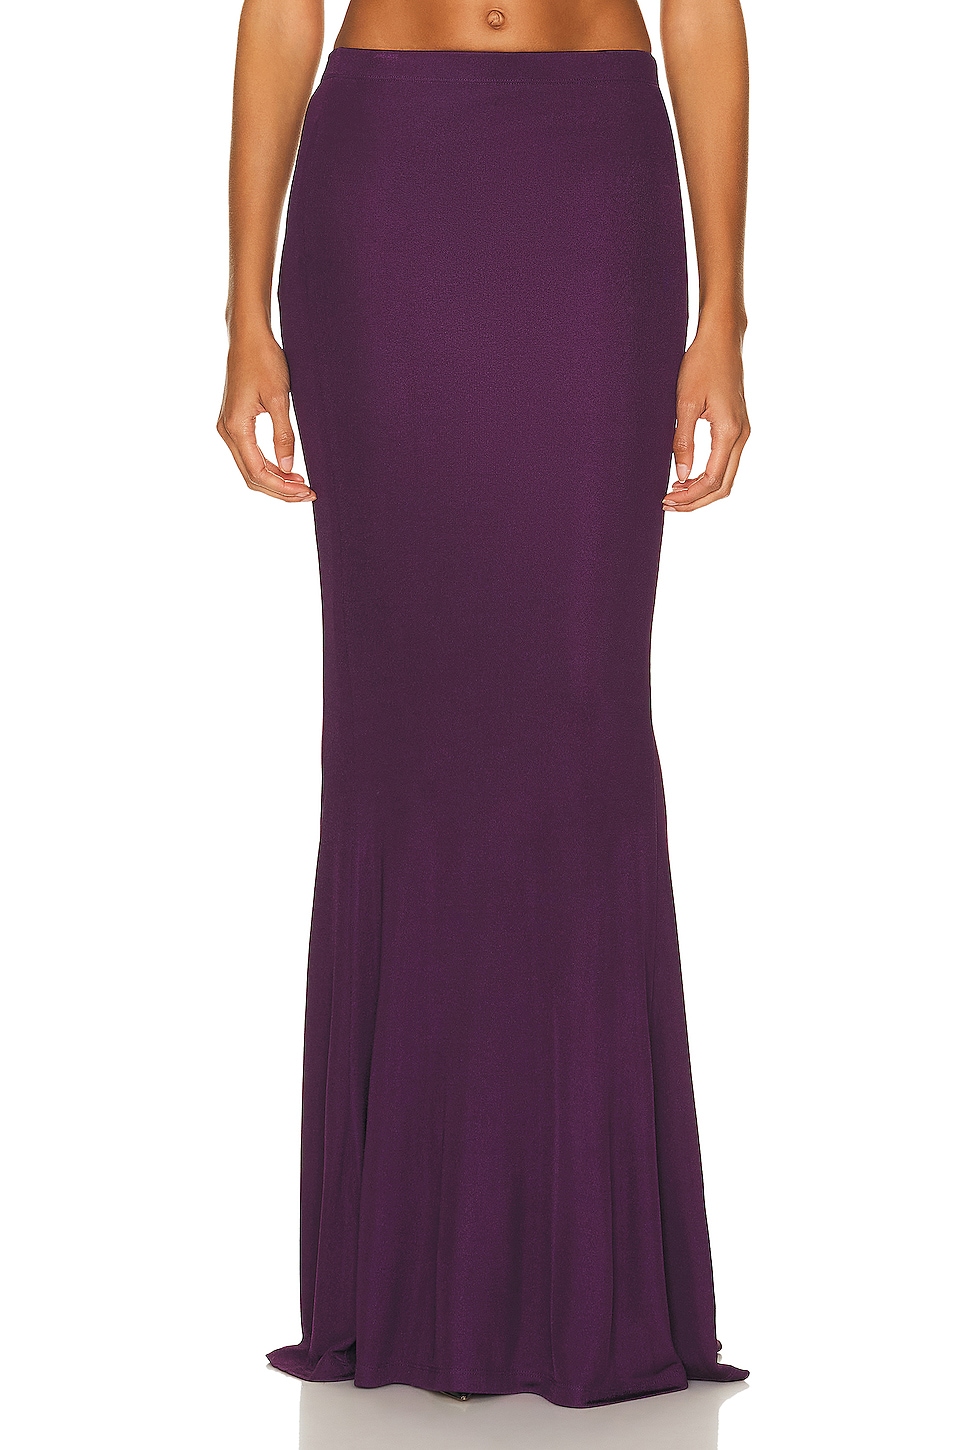 Image 1 of RTA Maxi Skirt in Grape